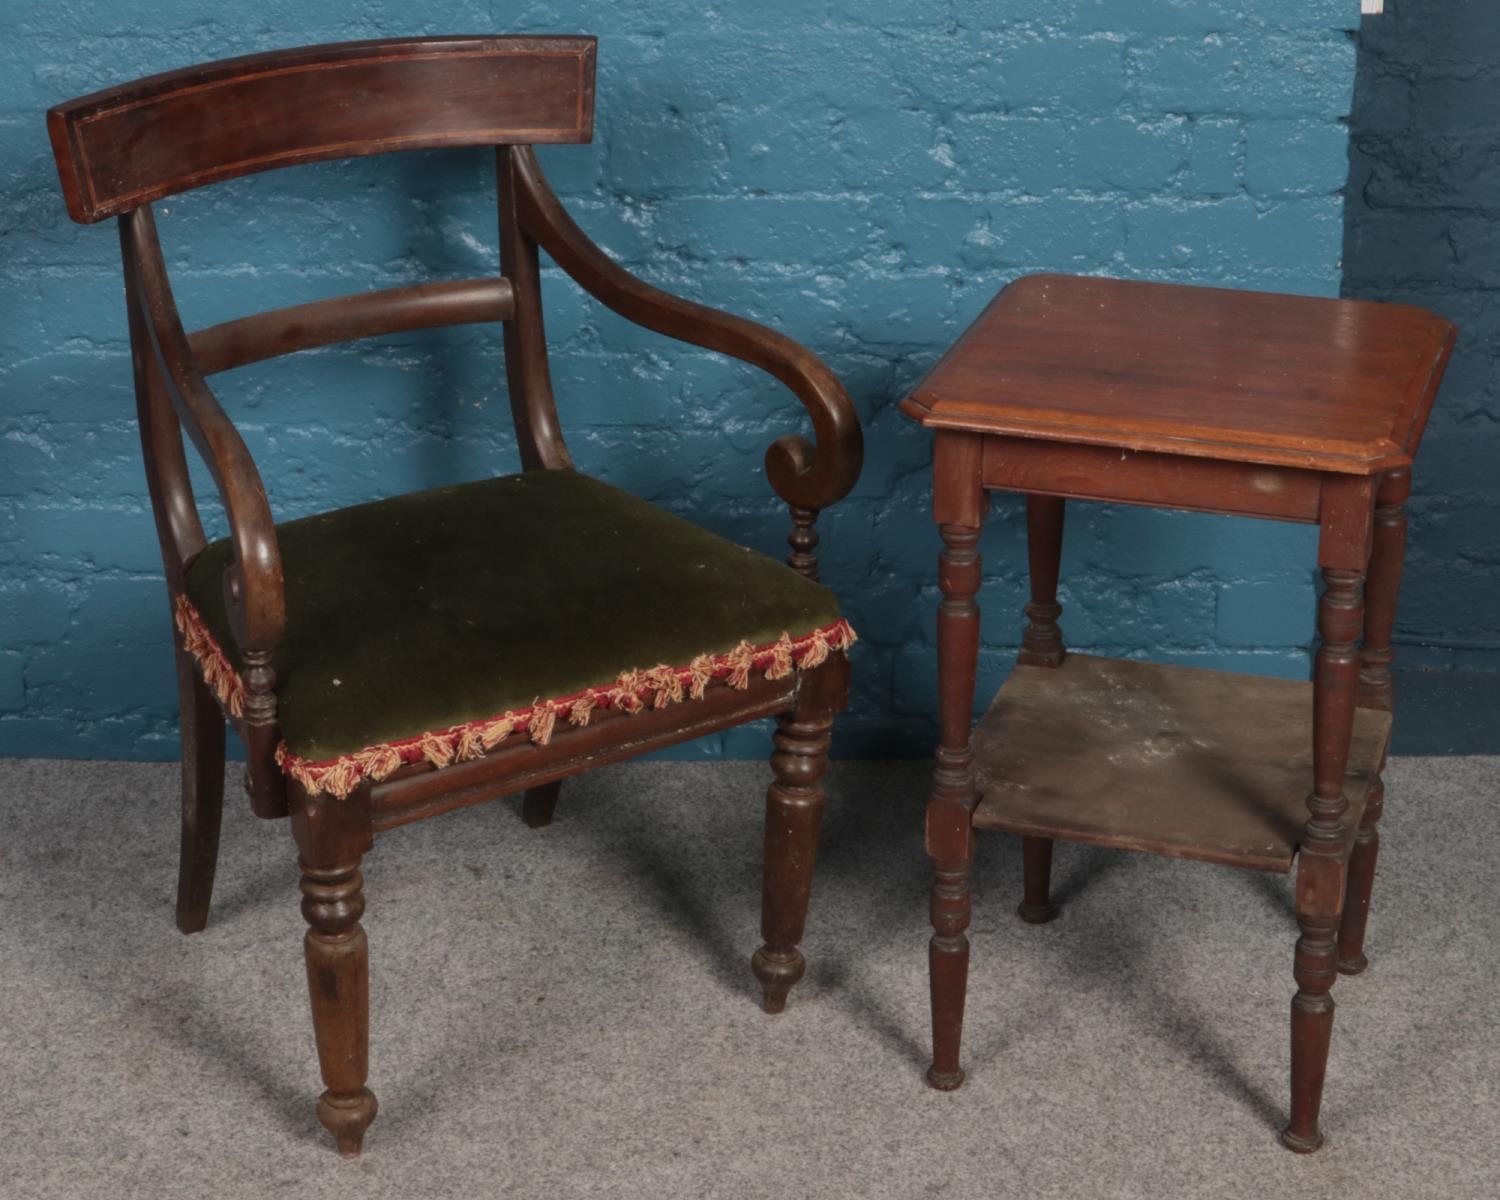 A mahogany two tier side table along with a mahogany upholstered armchair.